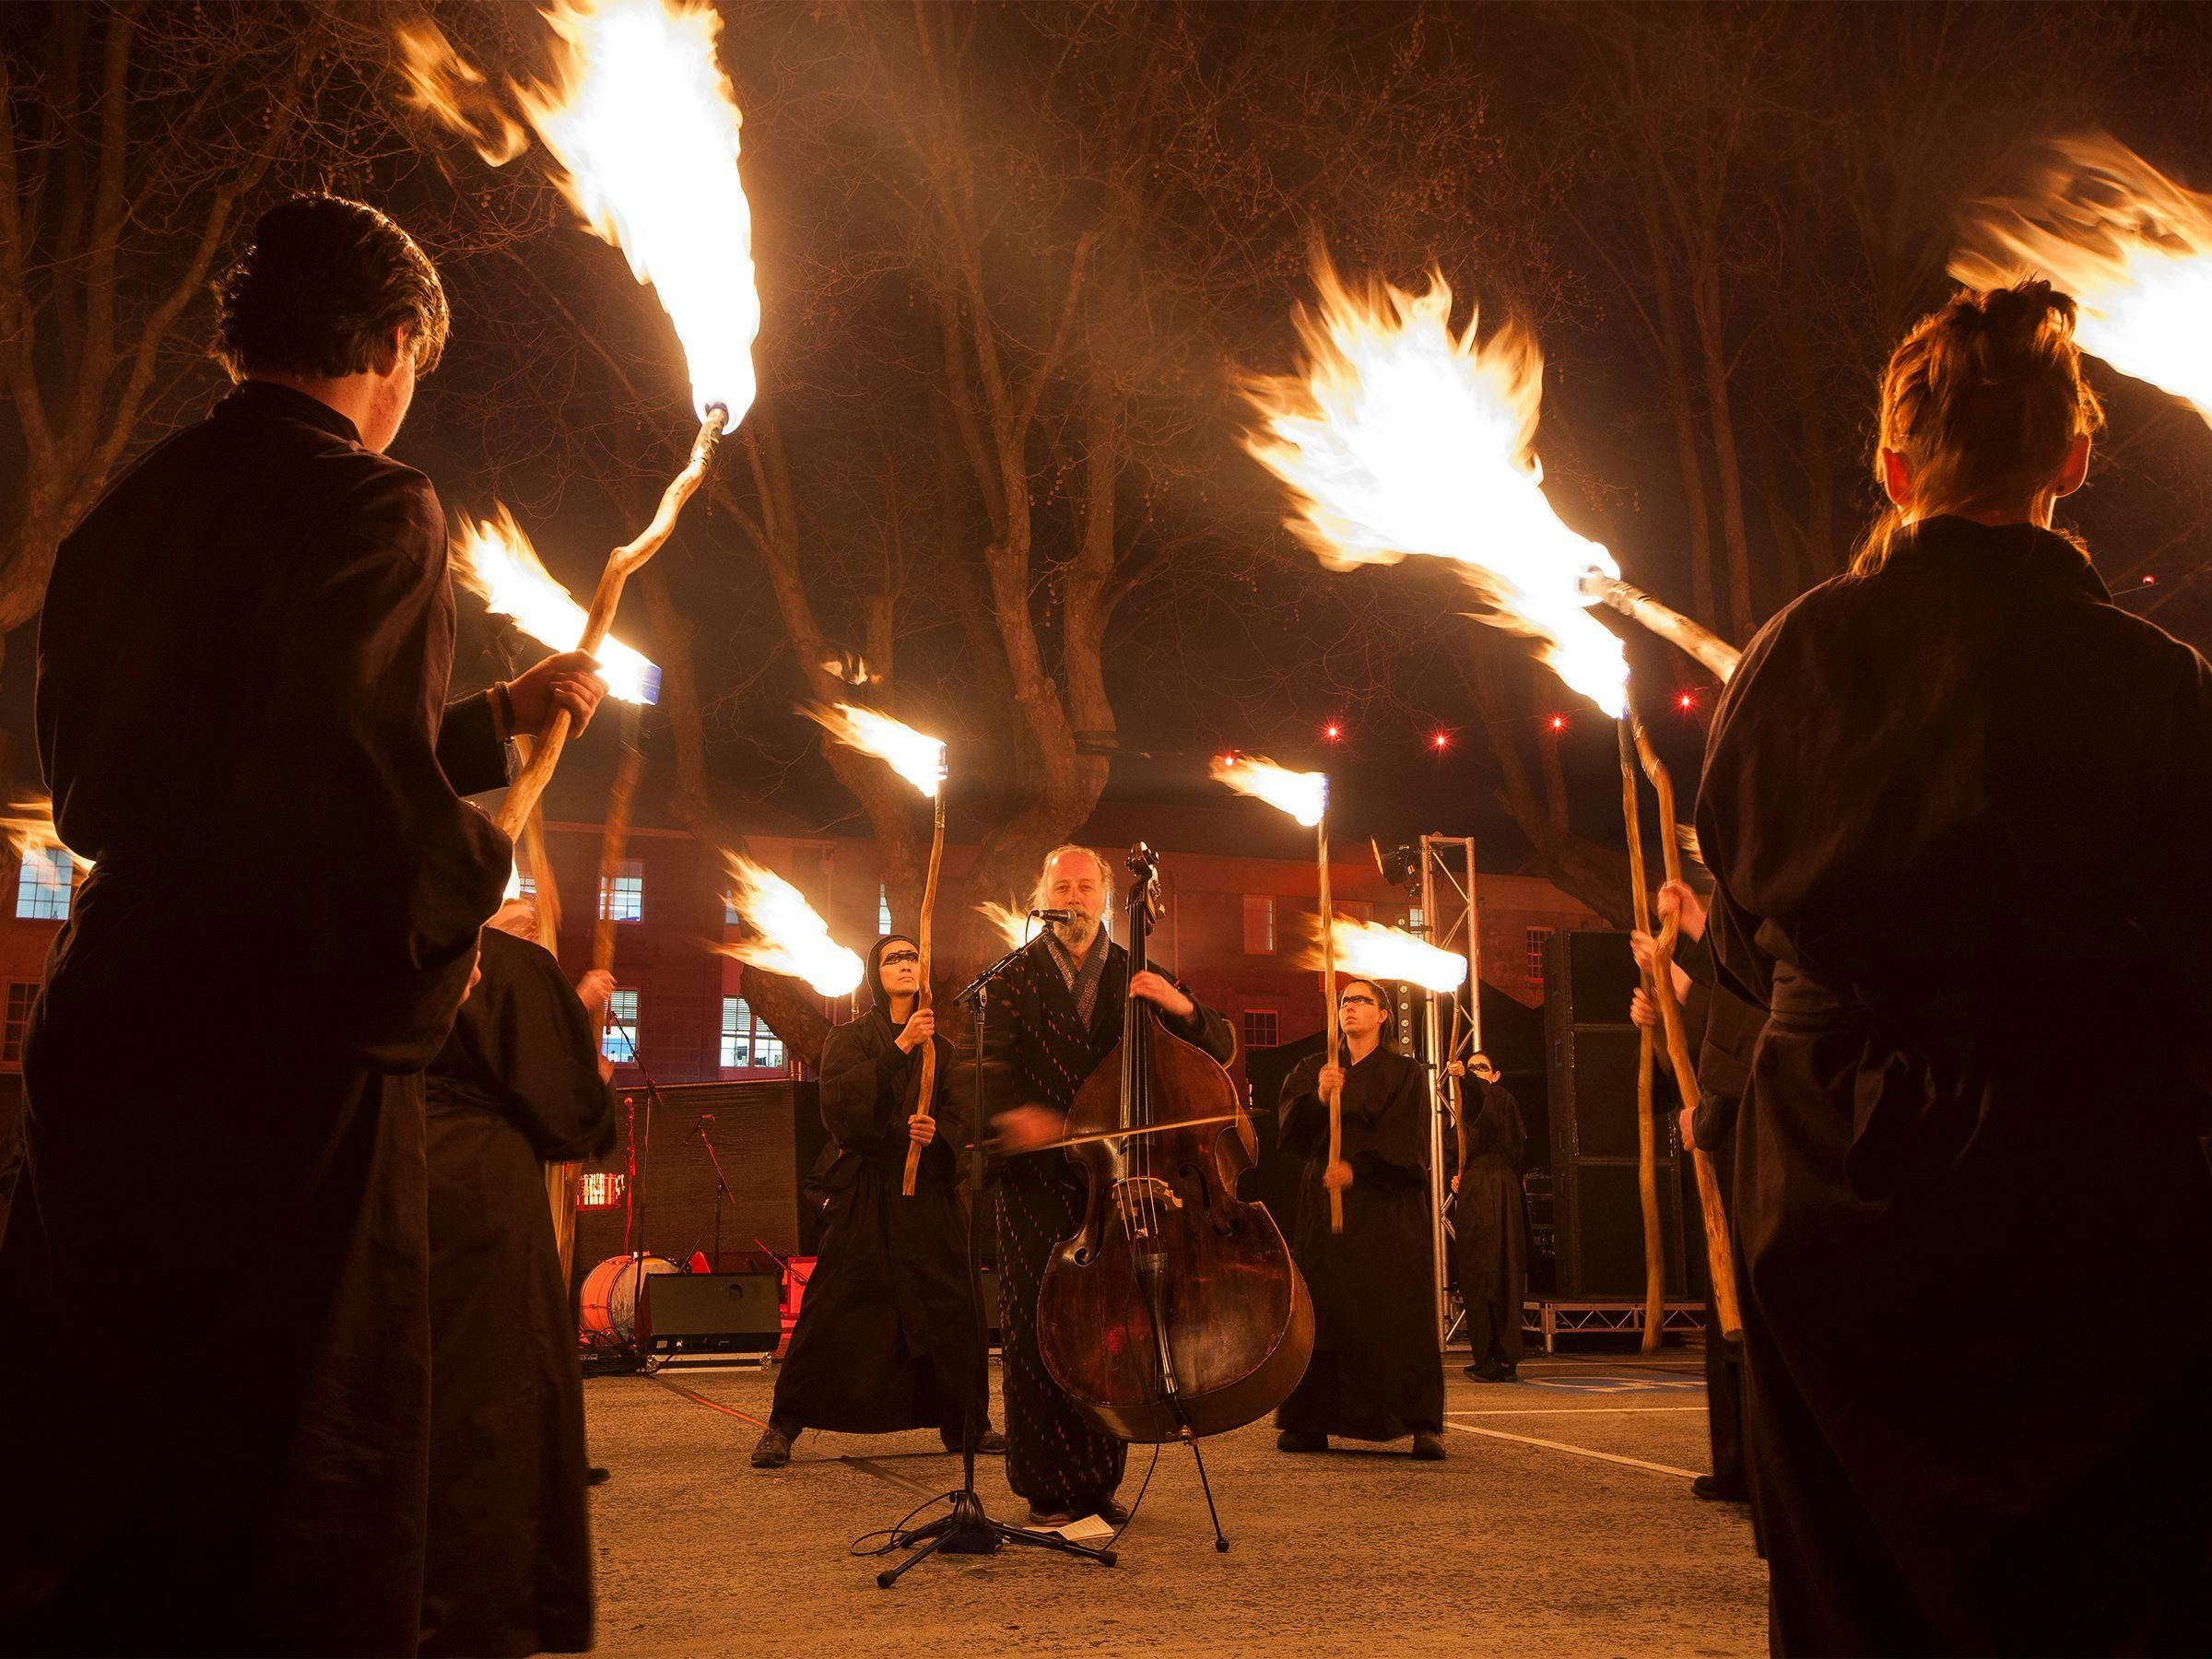 A man in a cloak playing the cello, surrounded by people holding fire sticks. 